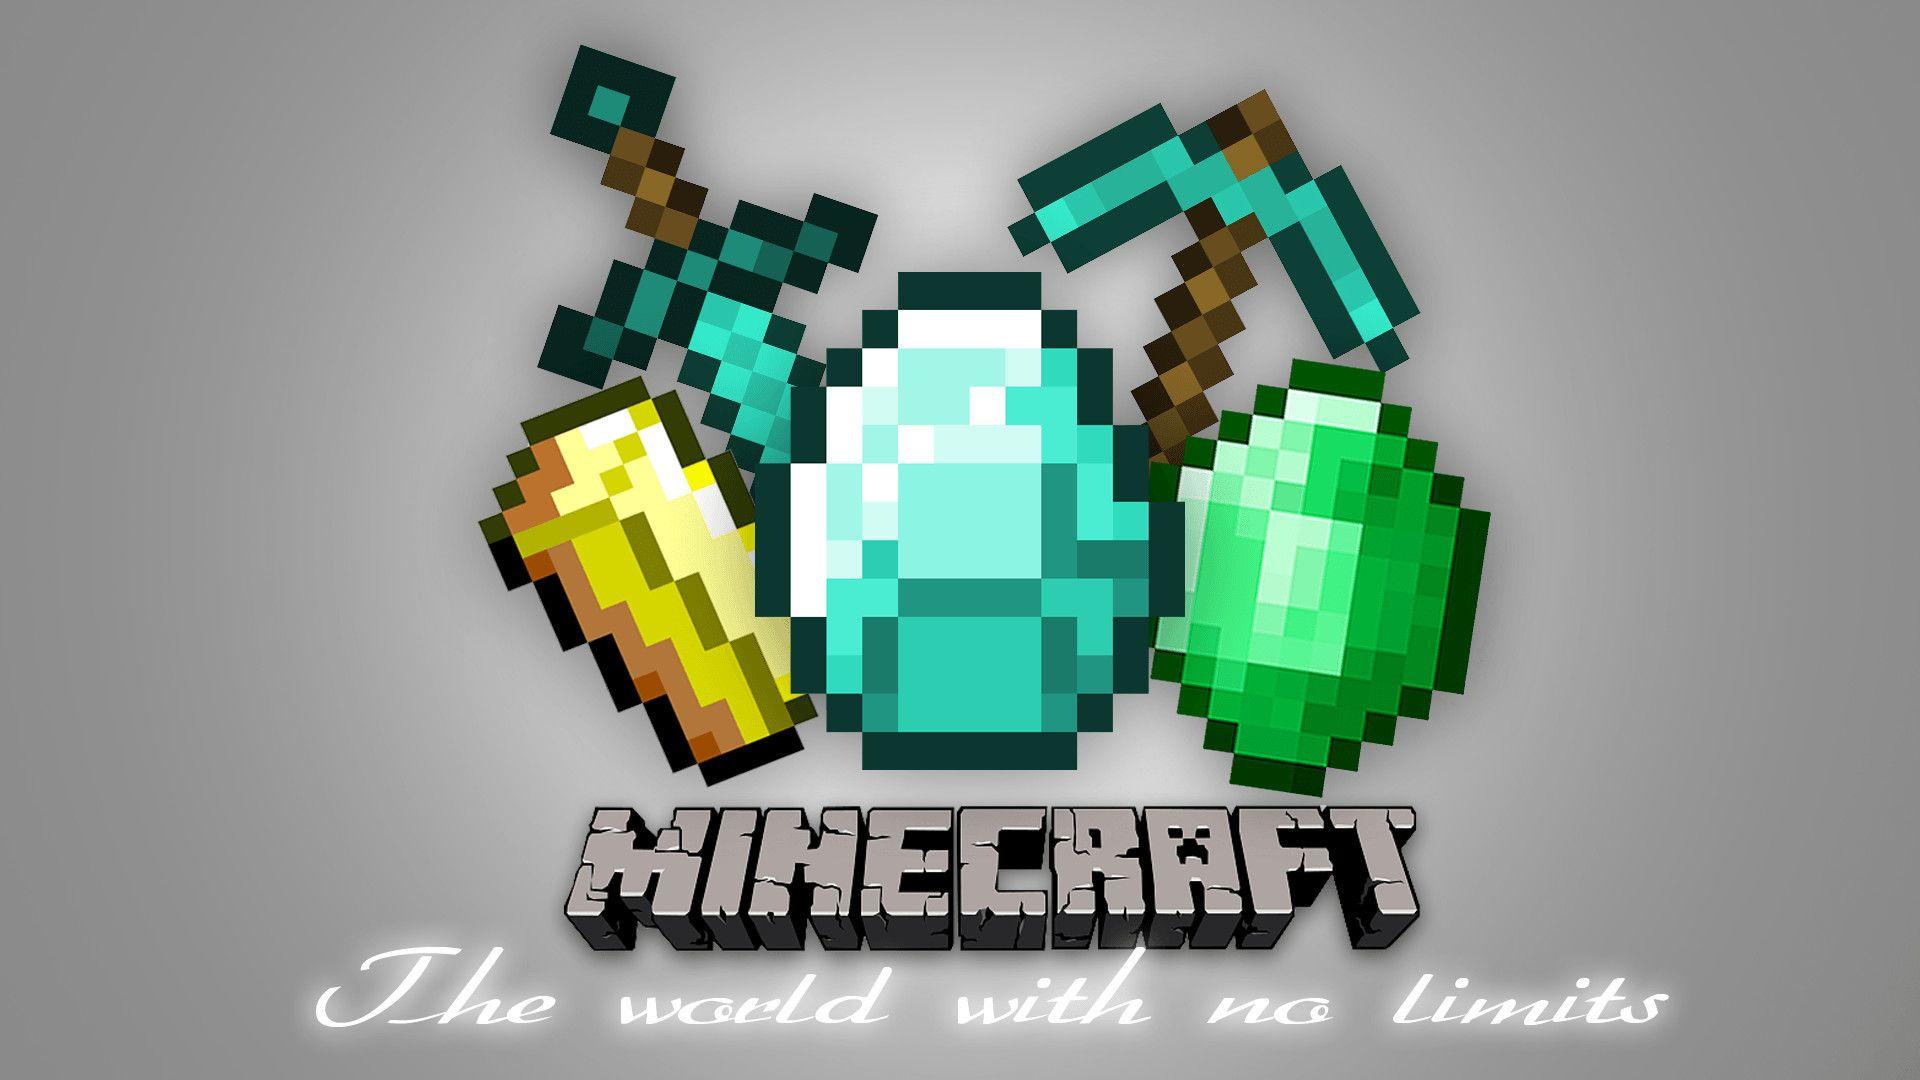 25 Epic Minecraft Wallpapers  Backgrounds  Minecraft wallpaper Wallpaper  backgrounds Free background pictures